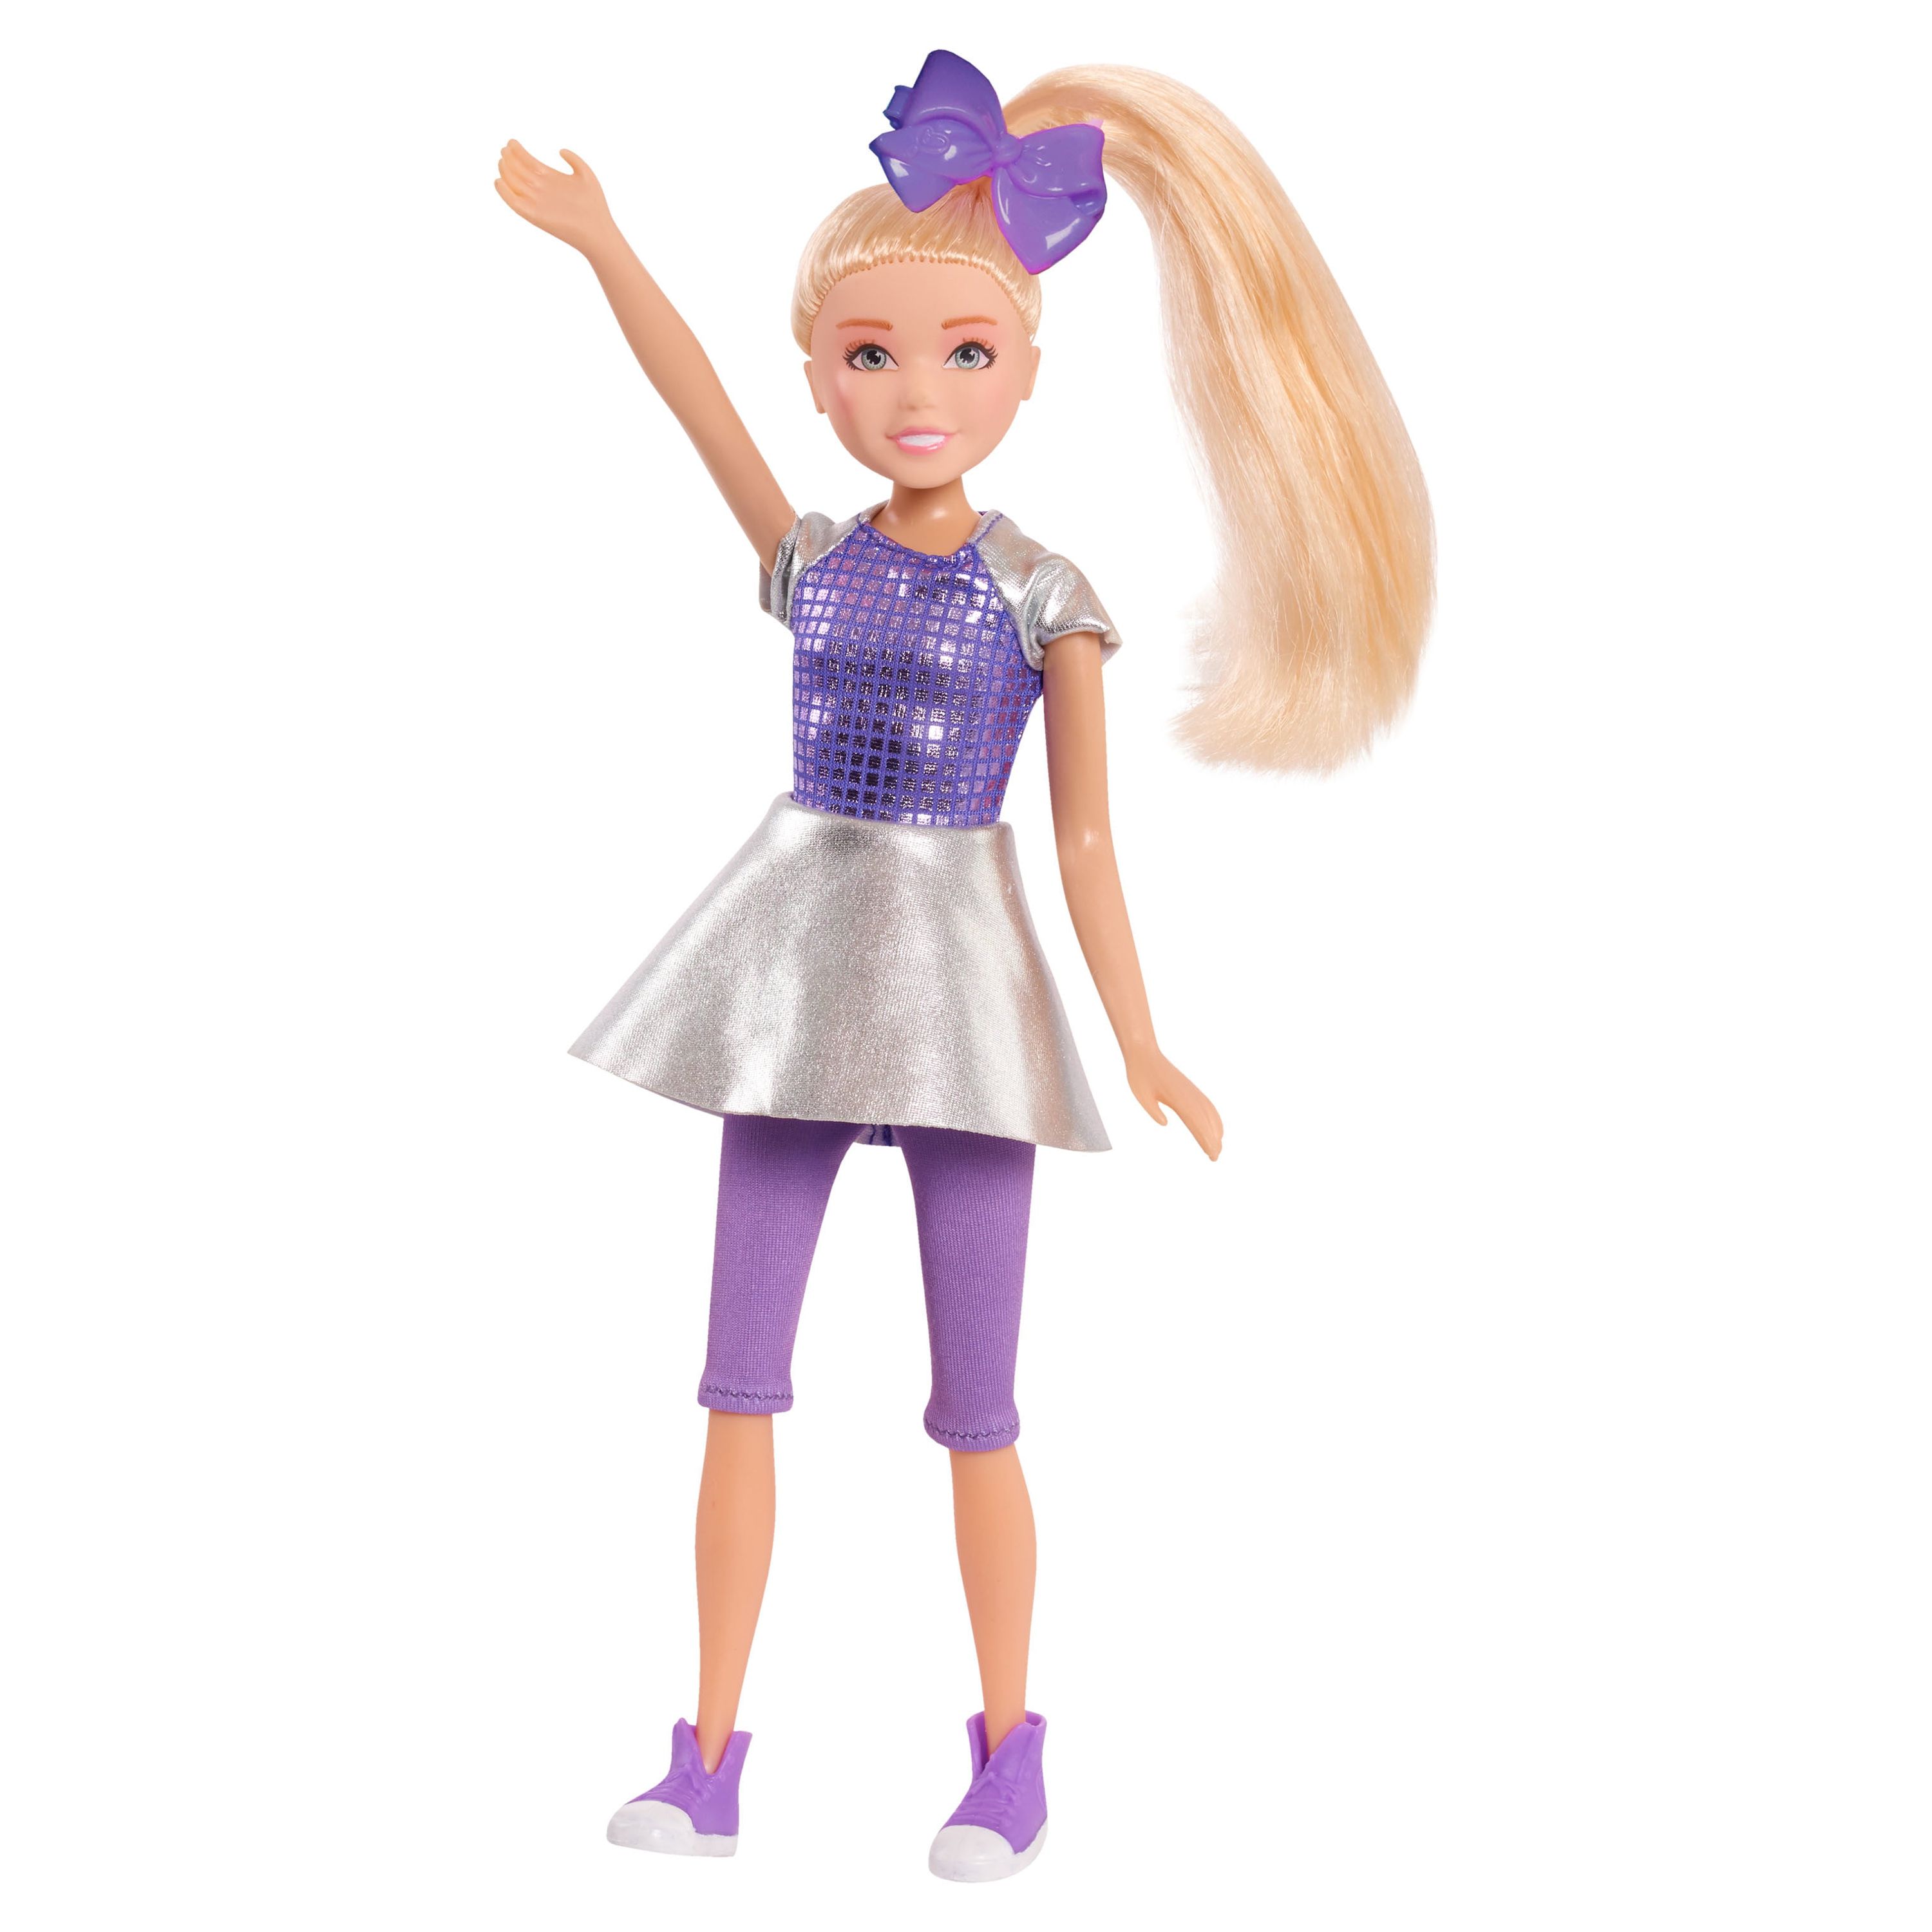 JoJo Siwa Fashion Doll, Out of this World, 10-inch doll,  Kids Toys for Ages 3 Up, Gifts and Presents - image 1 of 3